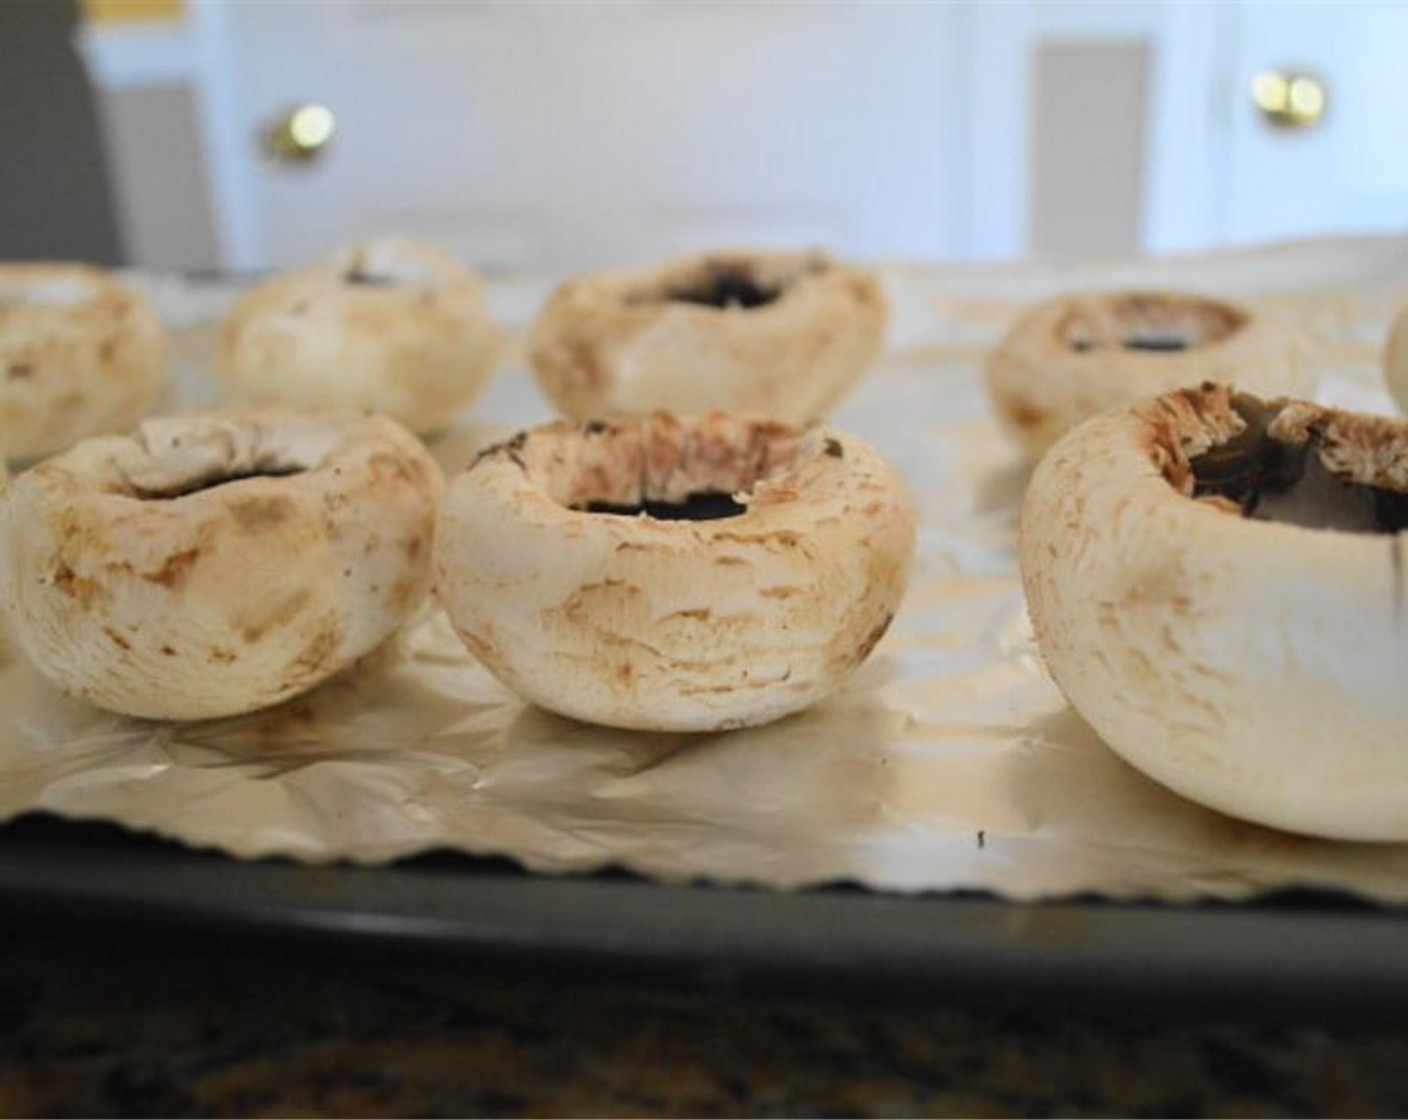 step 3 Transfer the prepped mushrooms to the sheet trays. Drizzle each mushroom with Olive Oil (as needed) and sprinkle them with a small pinch of Truffle Sea Salt (to taste) the trays in the oven and roast the mushrooms for 10 minutes to really develop their flavor.